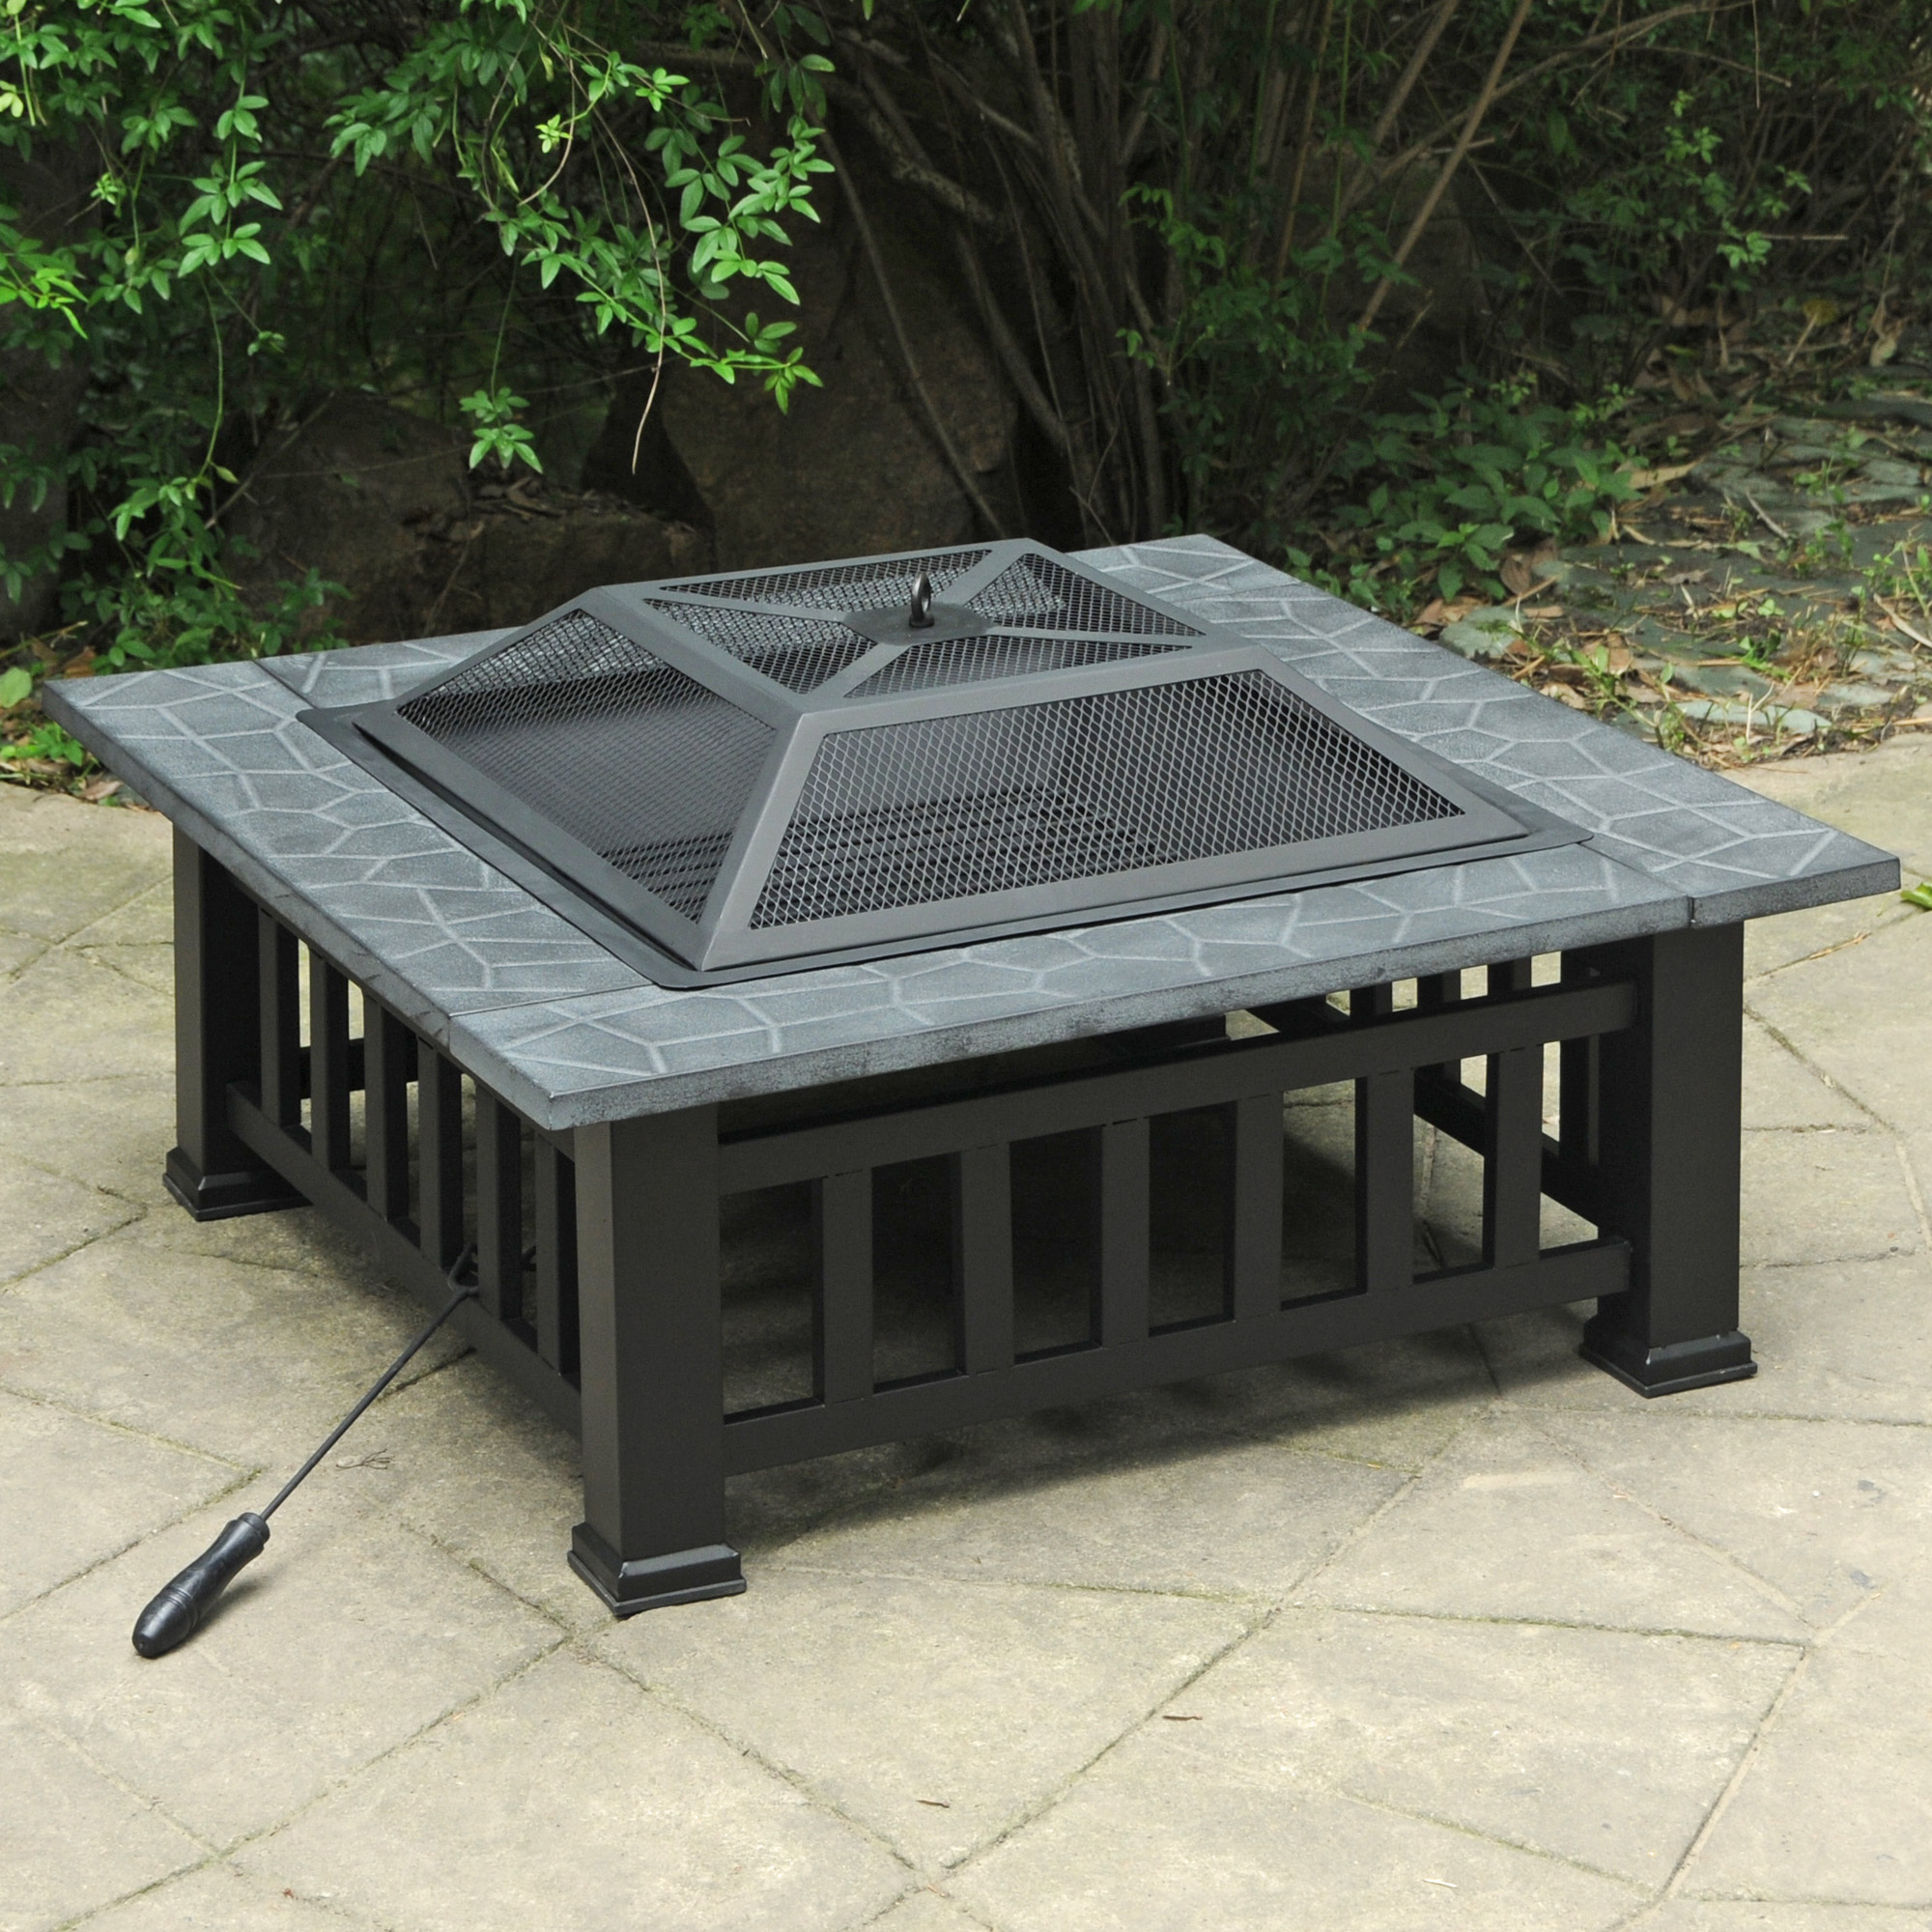 Axxonn 32" Alhambra Fire Pit with Safety Screen and Weatherproof Cover wood burning Fire Bowl - image 2 of 5